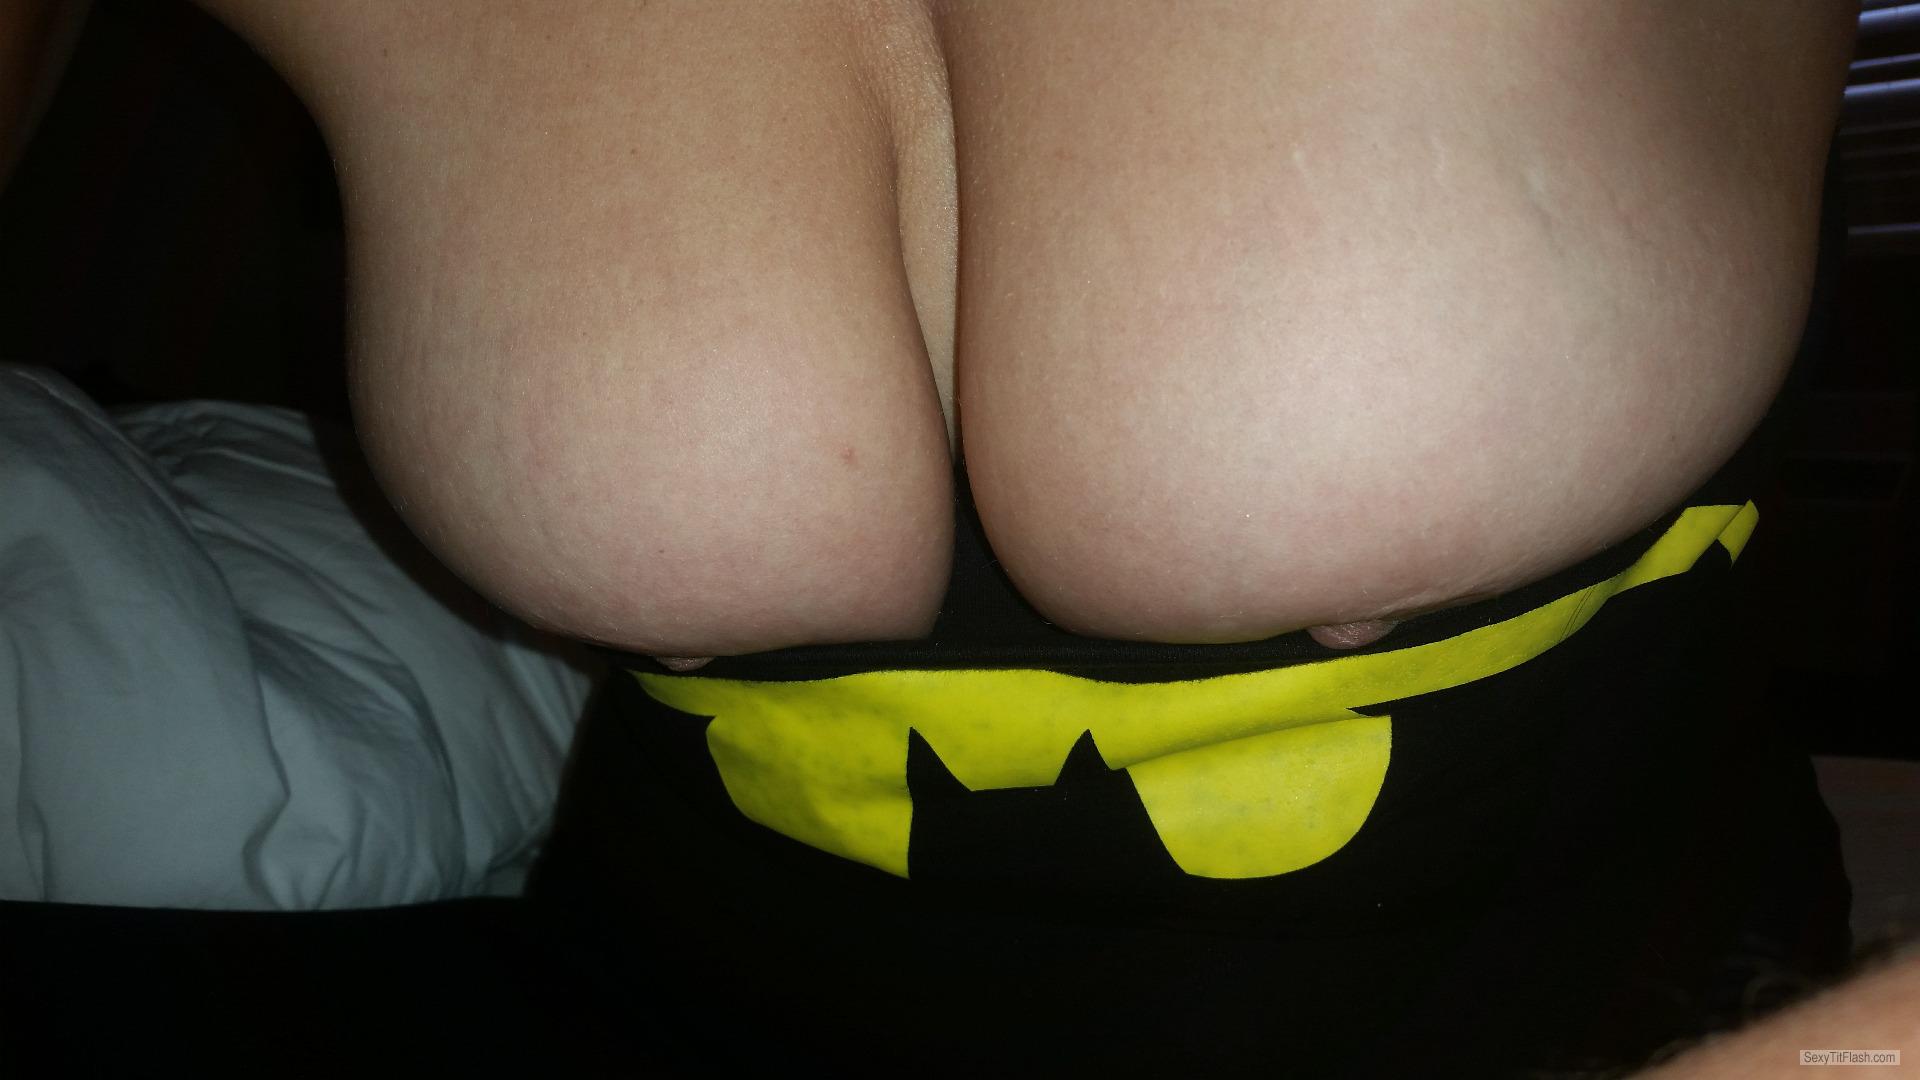 Tit Flash: My Big Tits - Naughty Mommy from United States